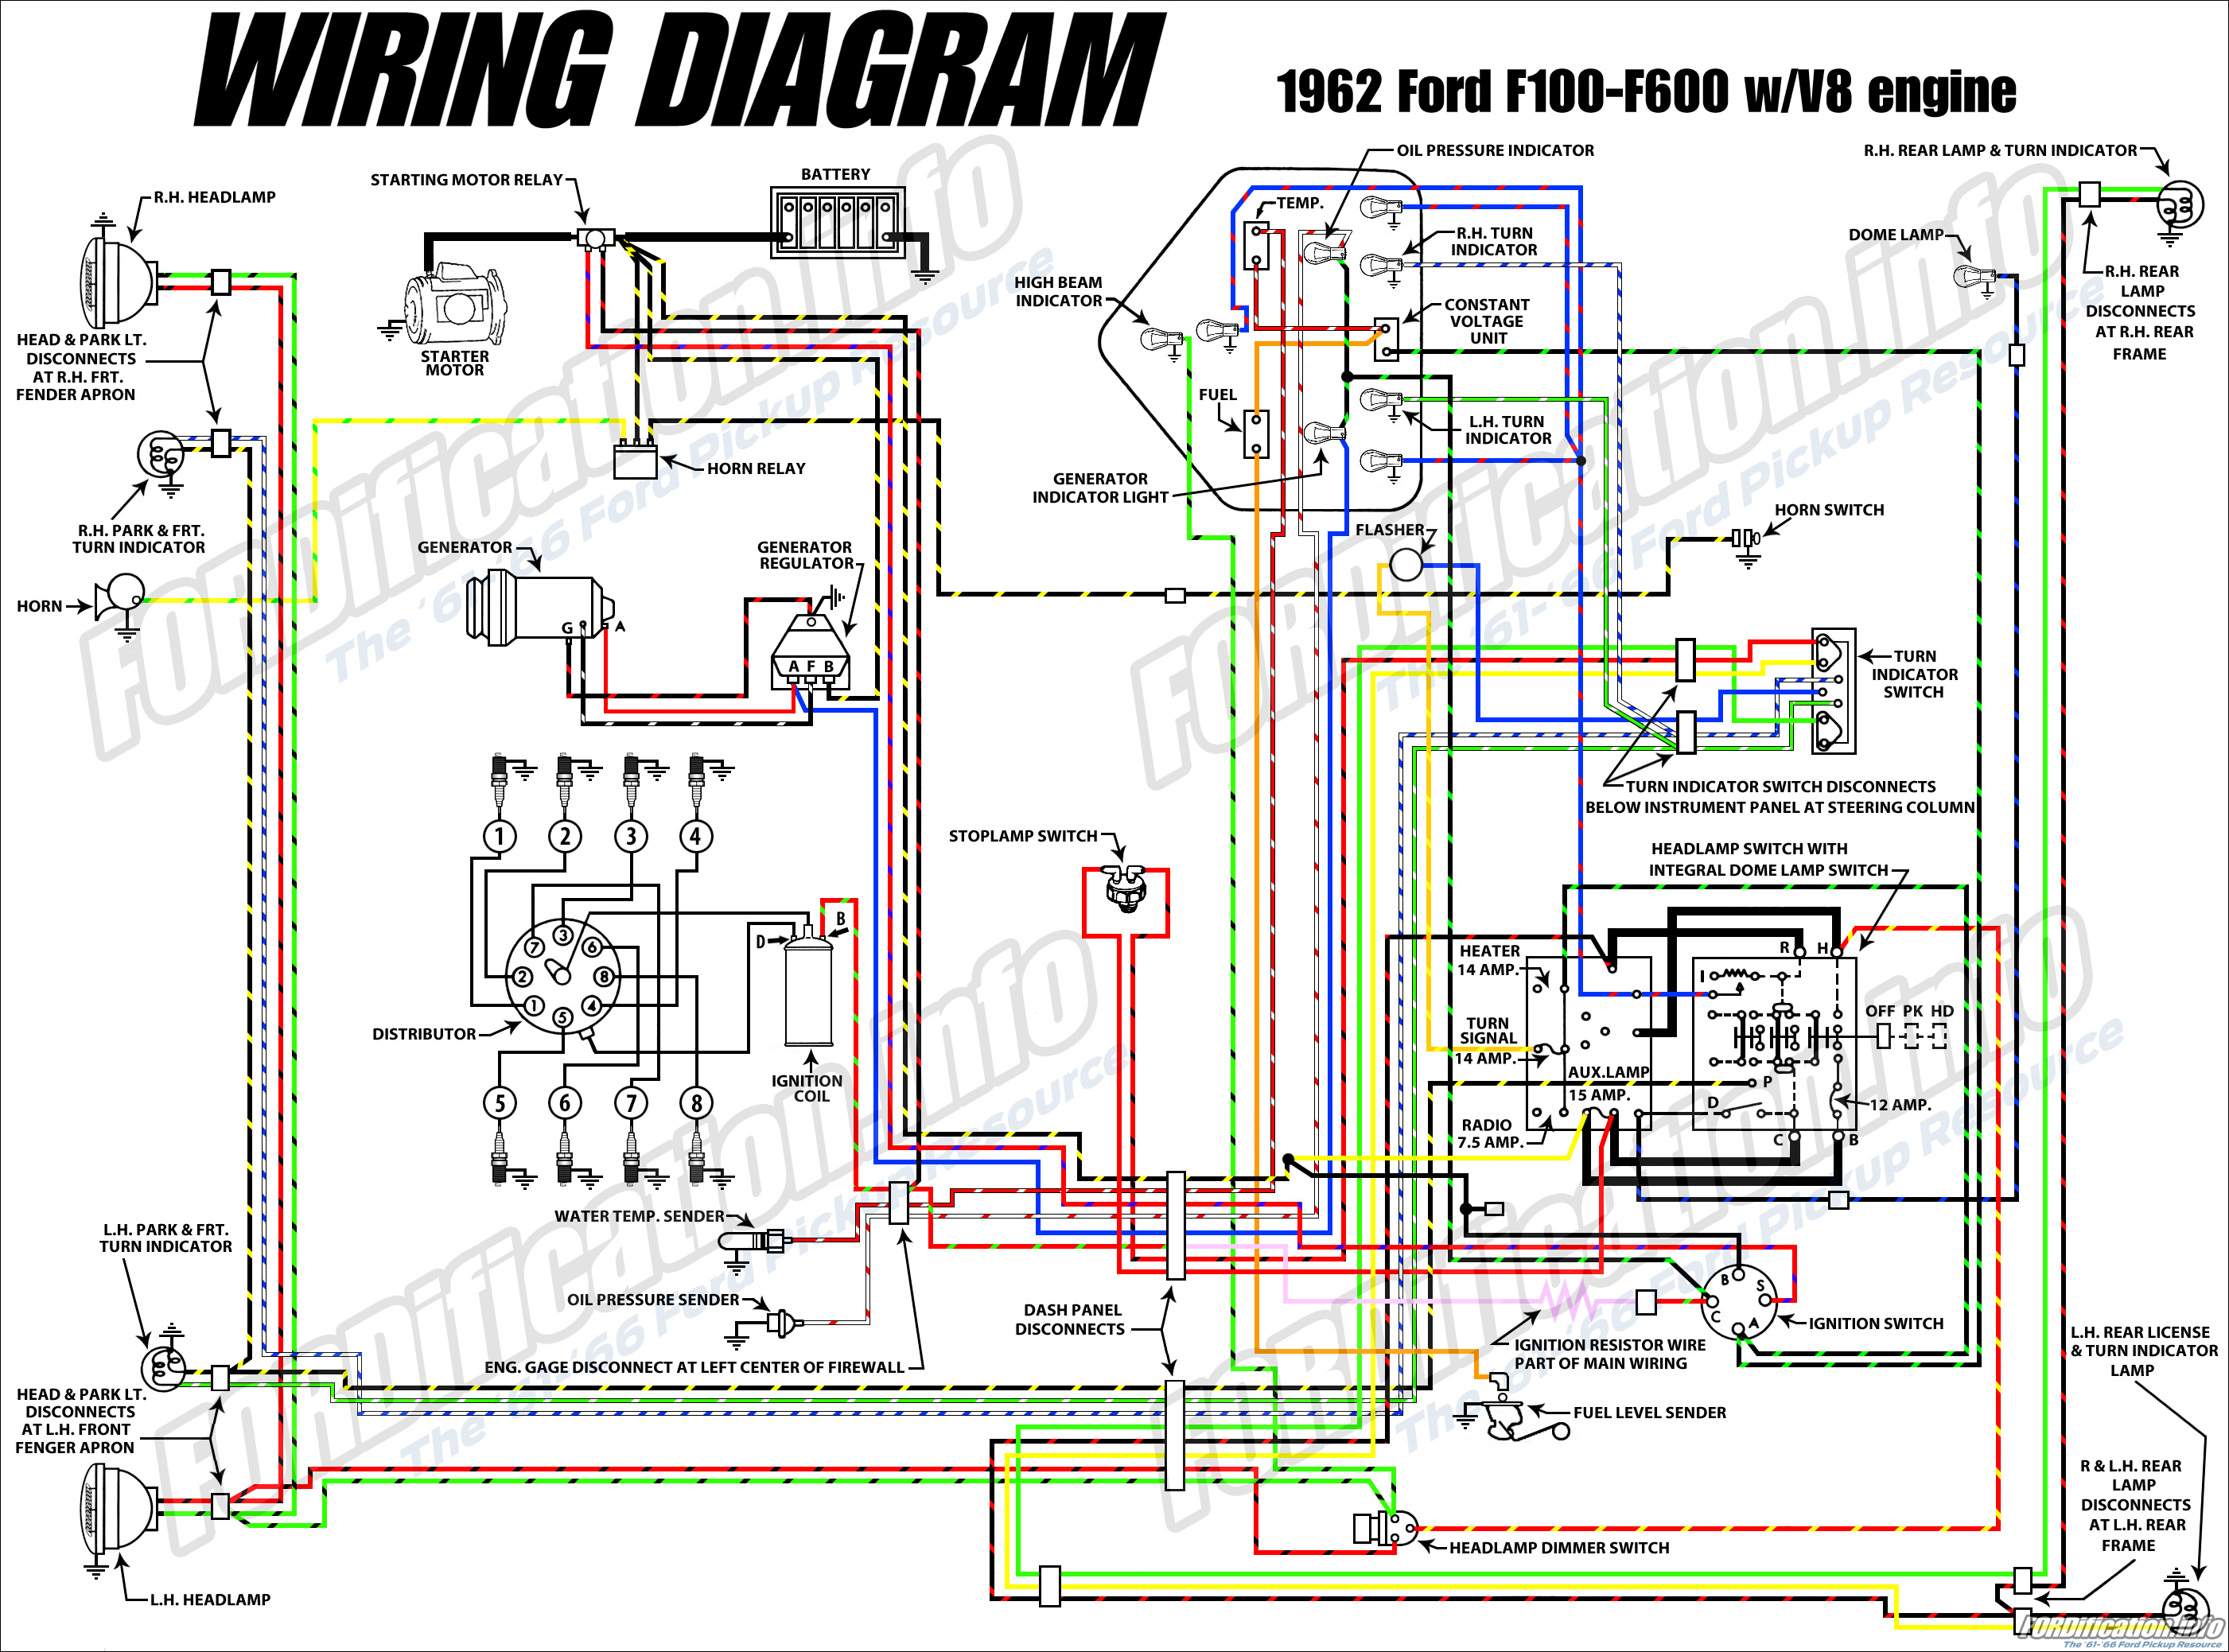 1971 Ford Truck Wiring Diagram Images Wiring Diagram Sample